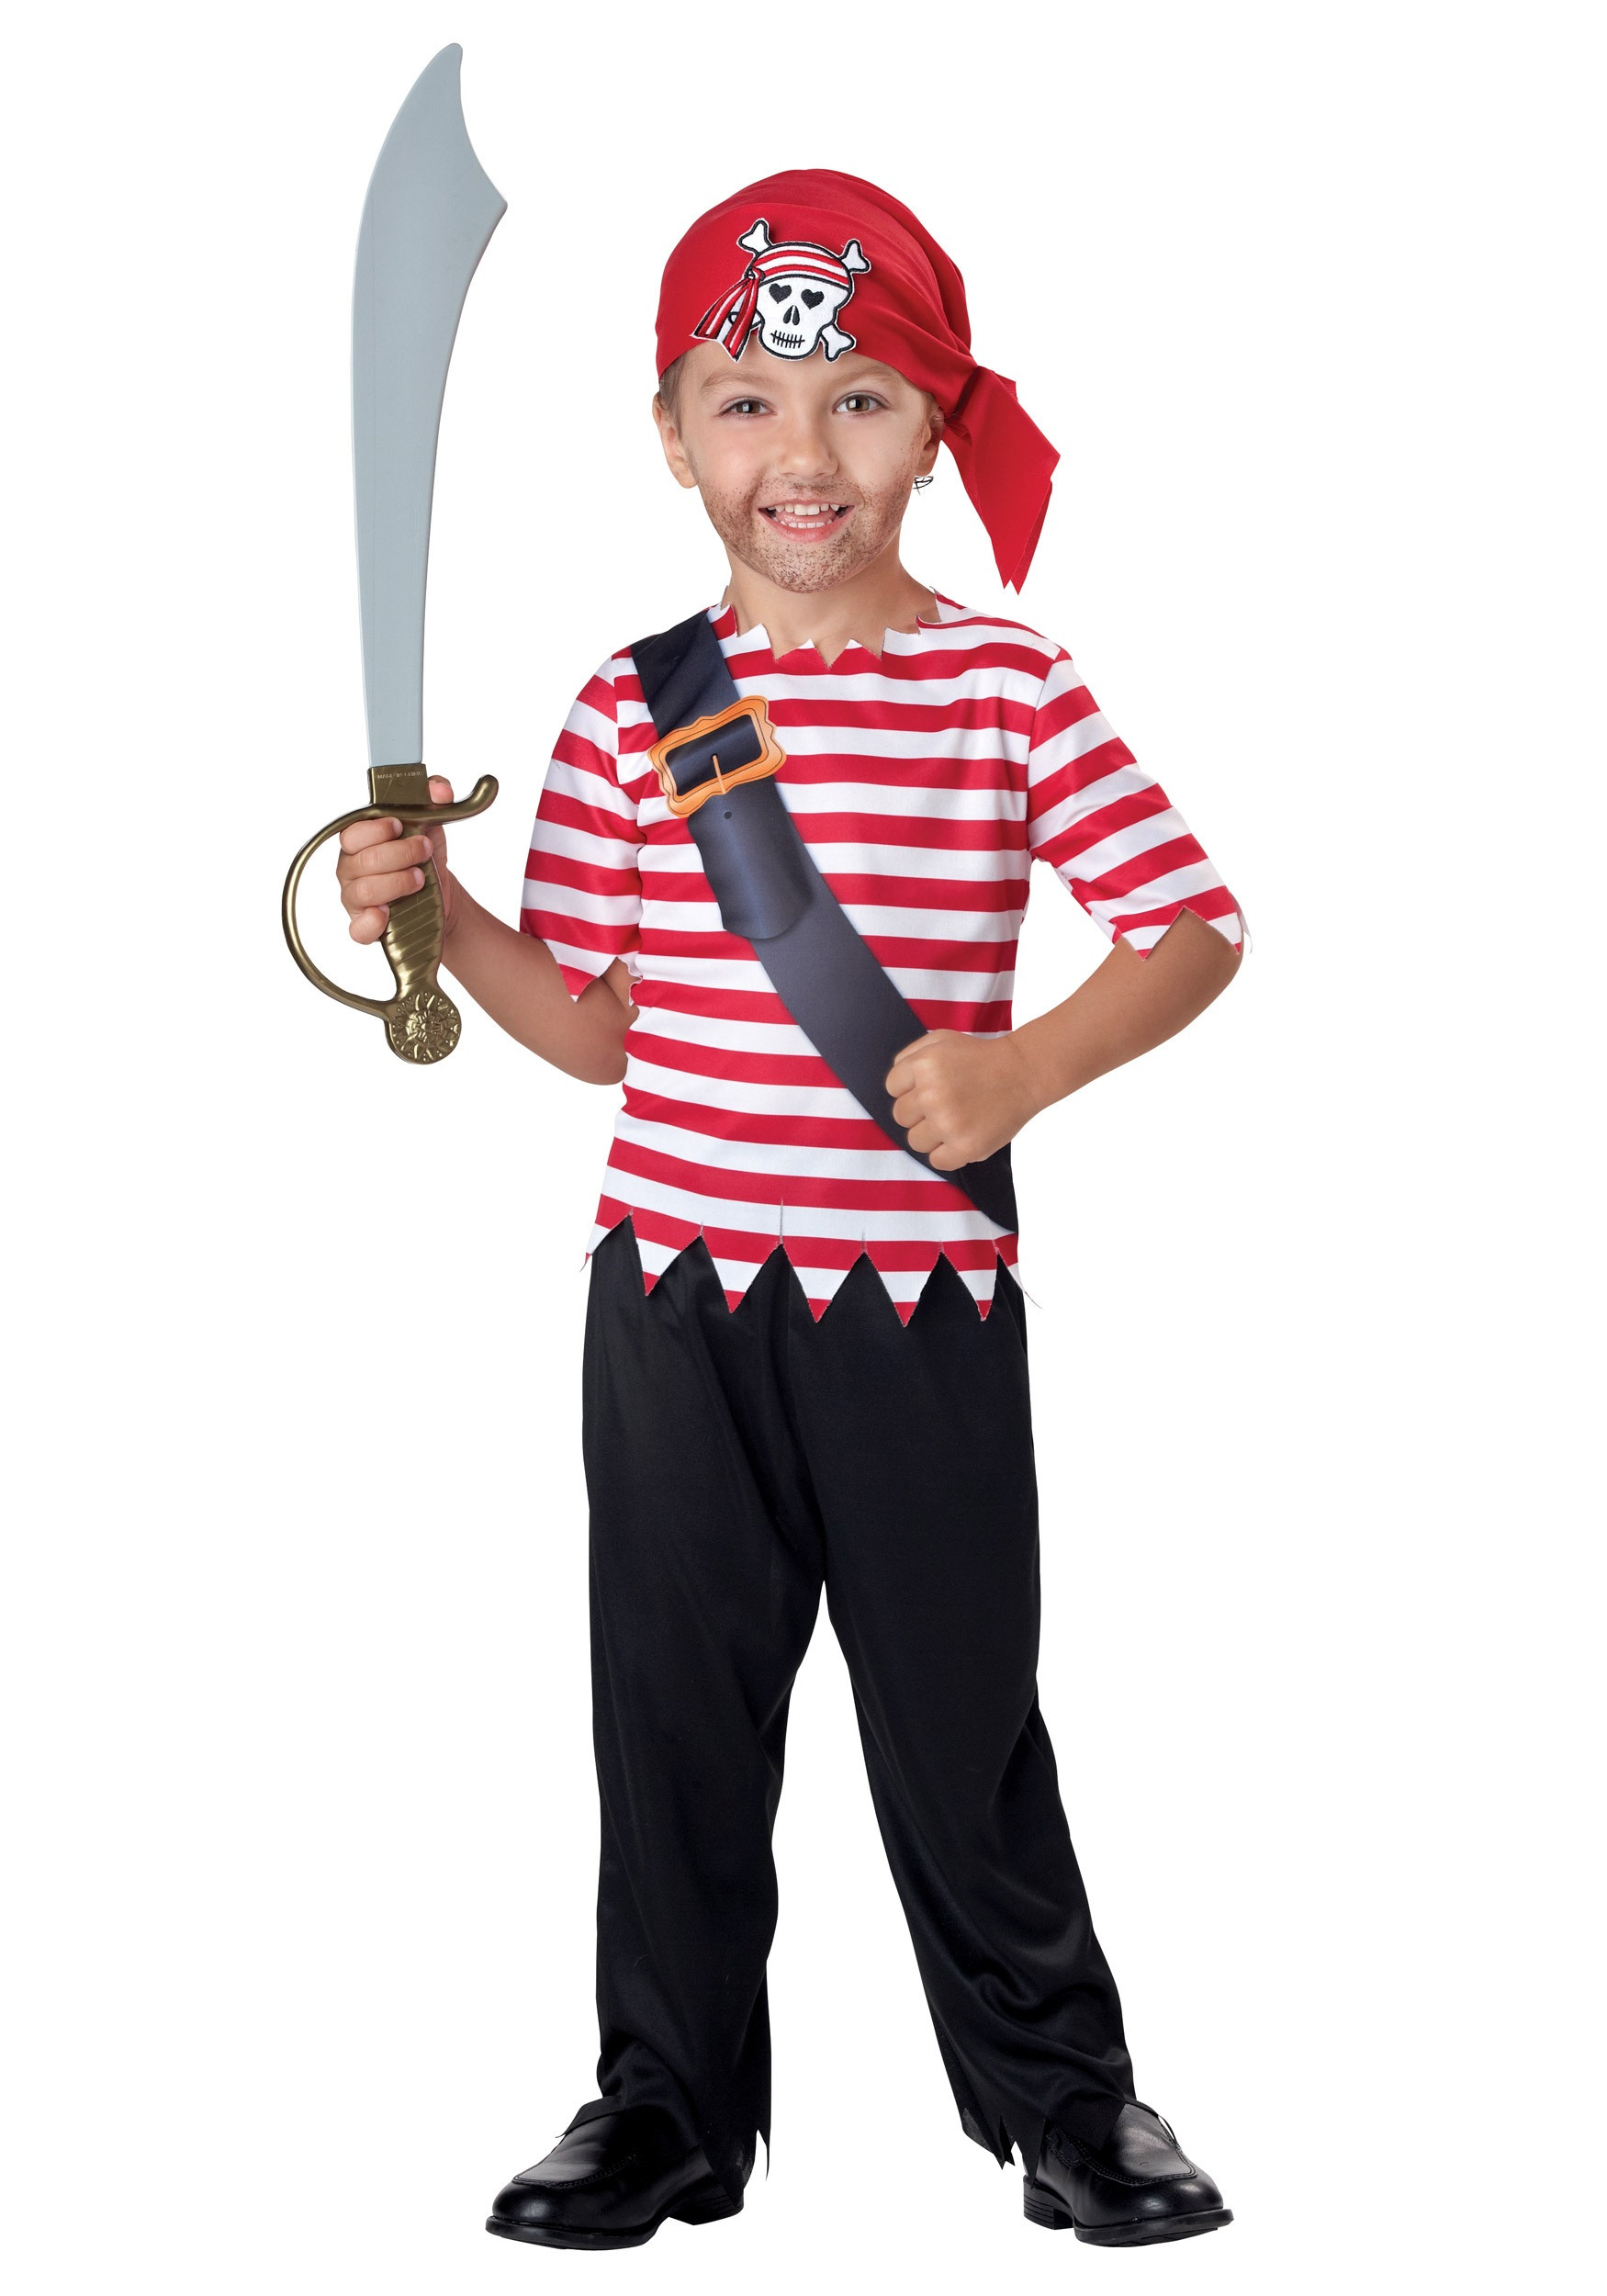 DIY Pirate Costume For Toddler
 Toddler Pirate Costume